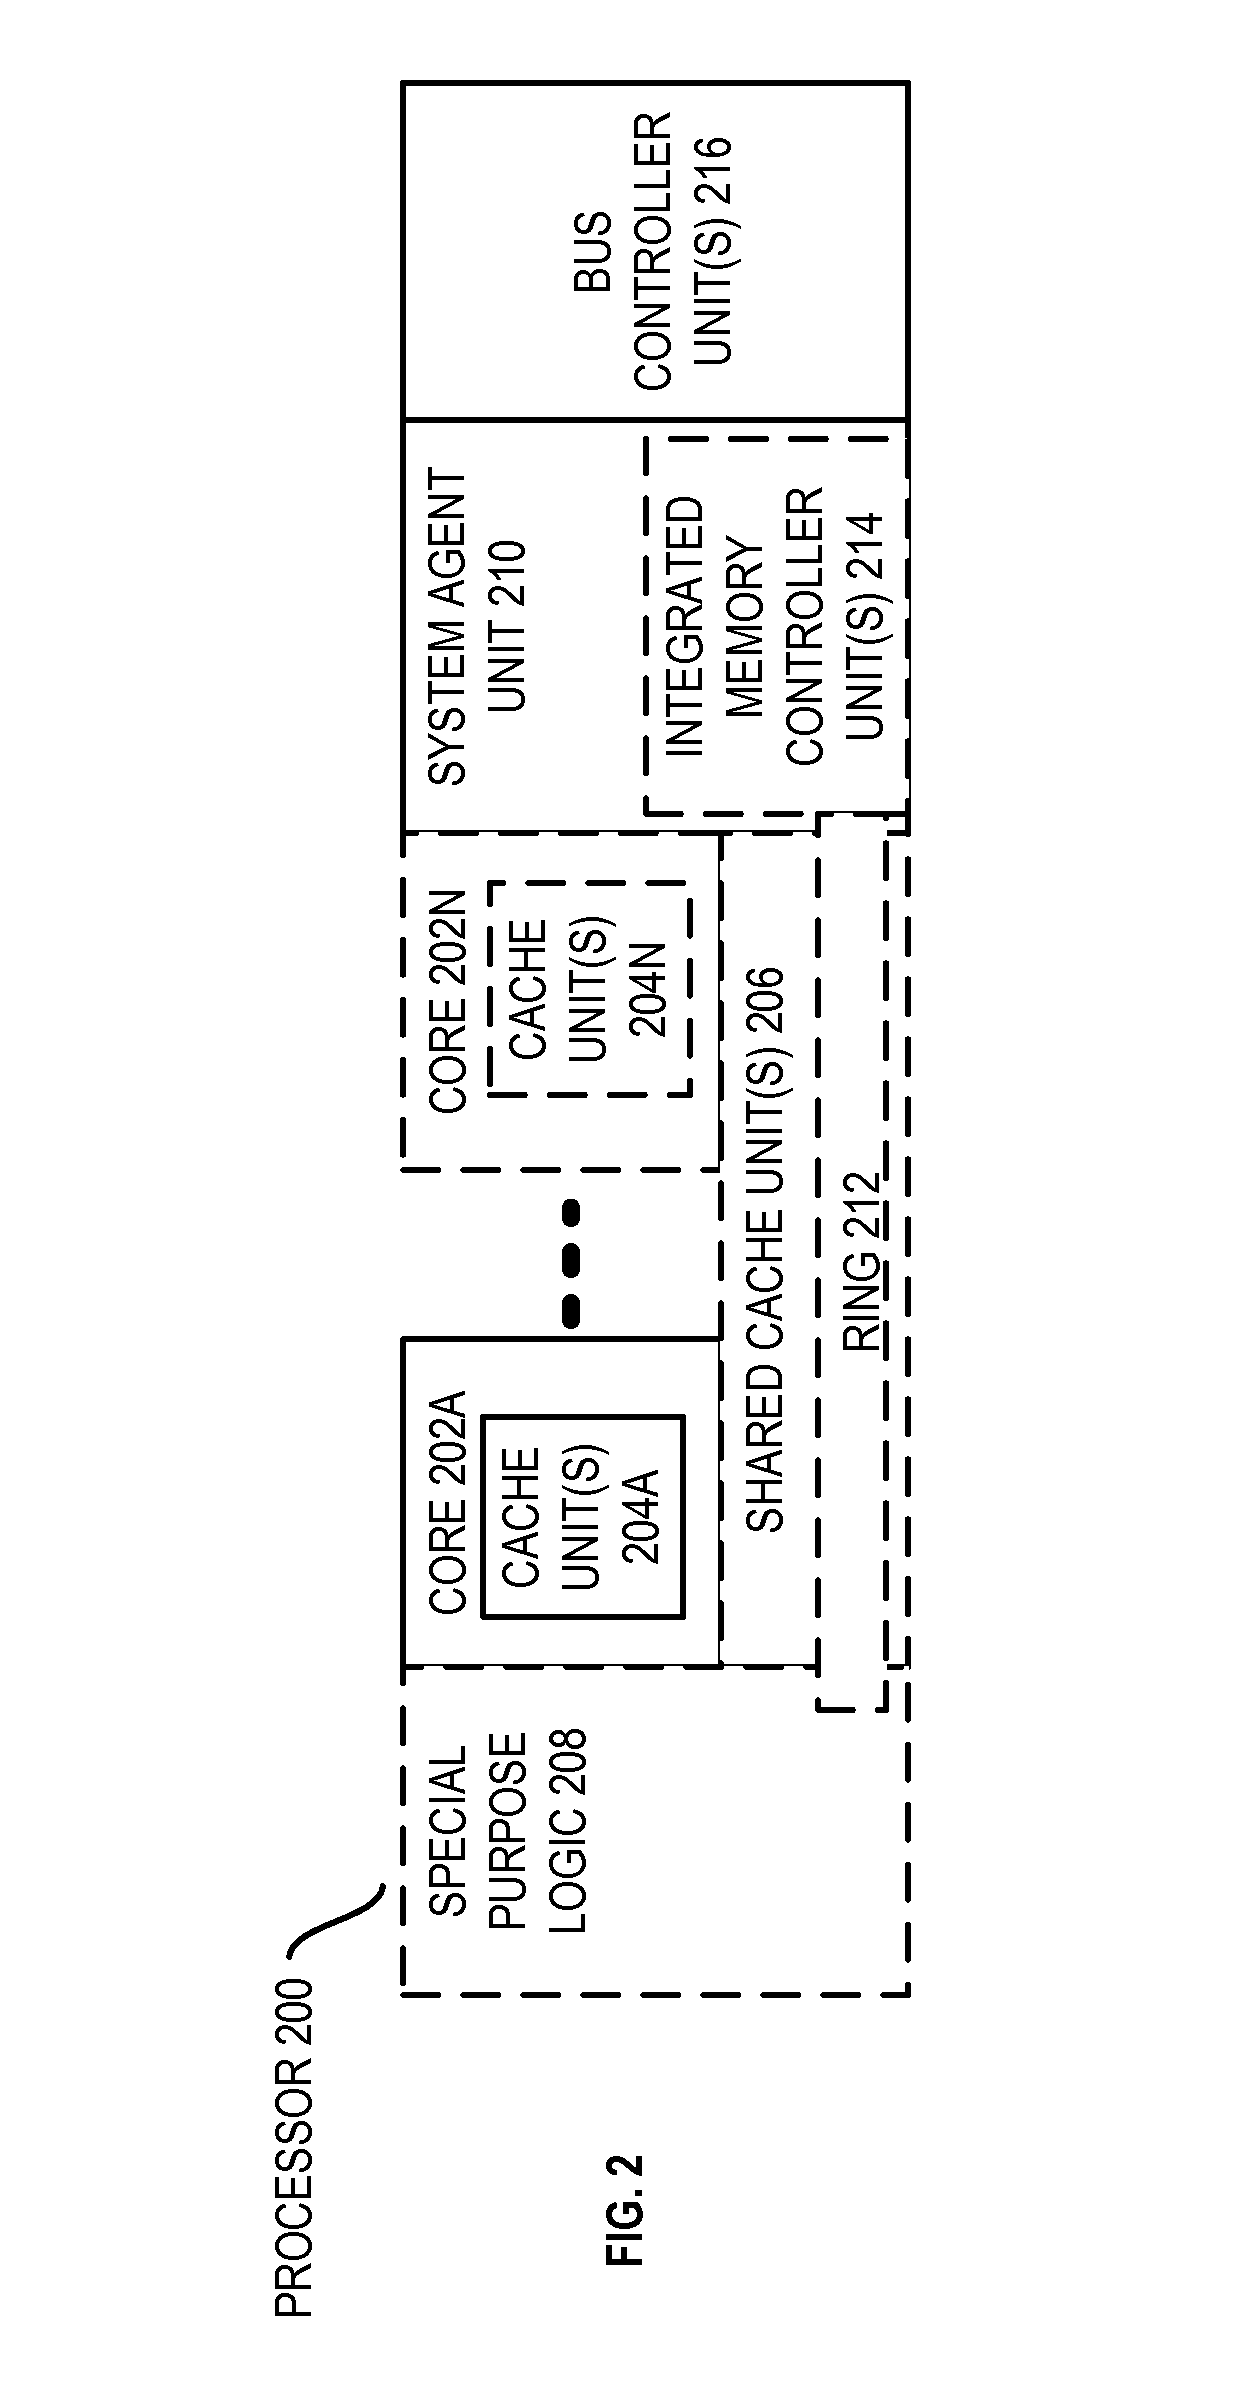 Method and apparatus for implementing dynamic portbinding within a reservation station